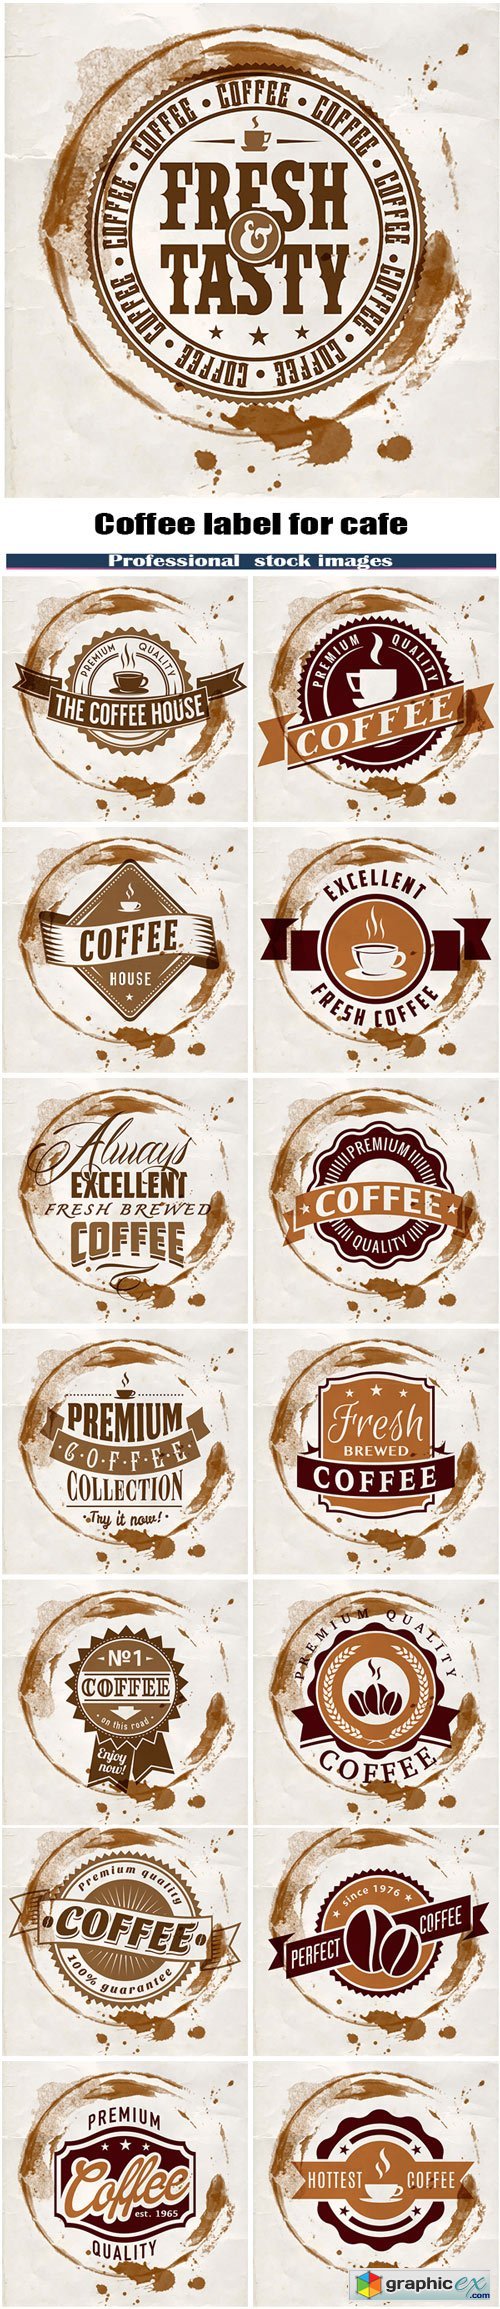 Coffee label for cafe